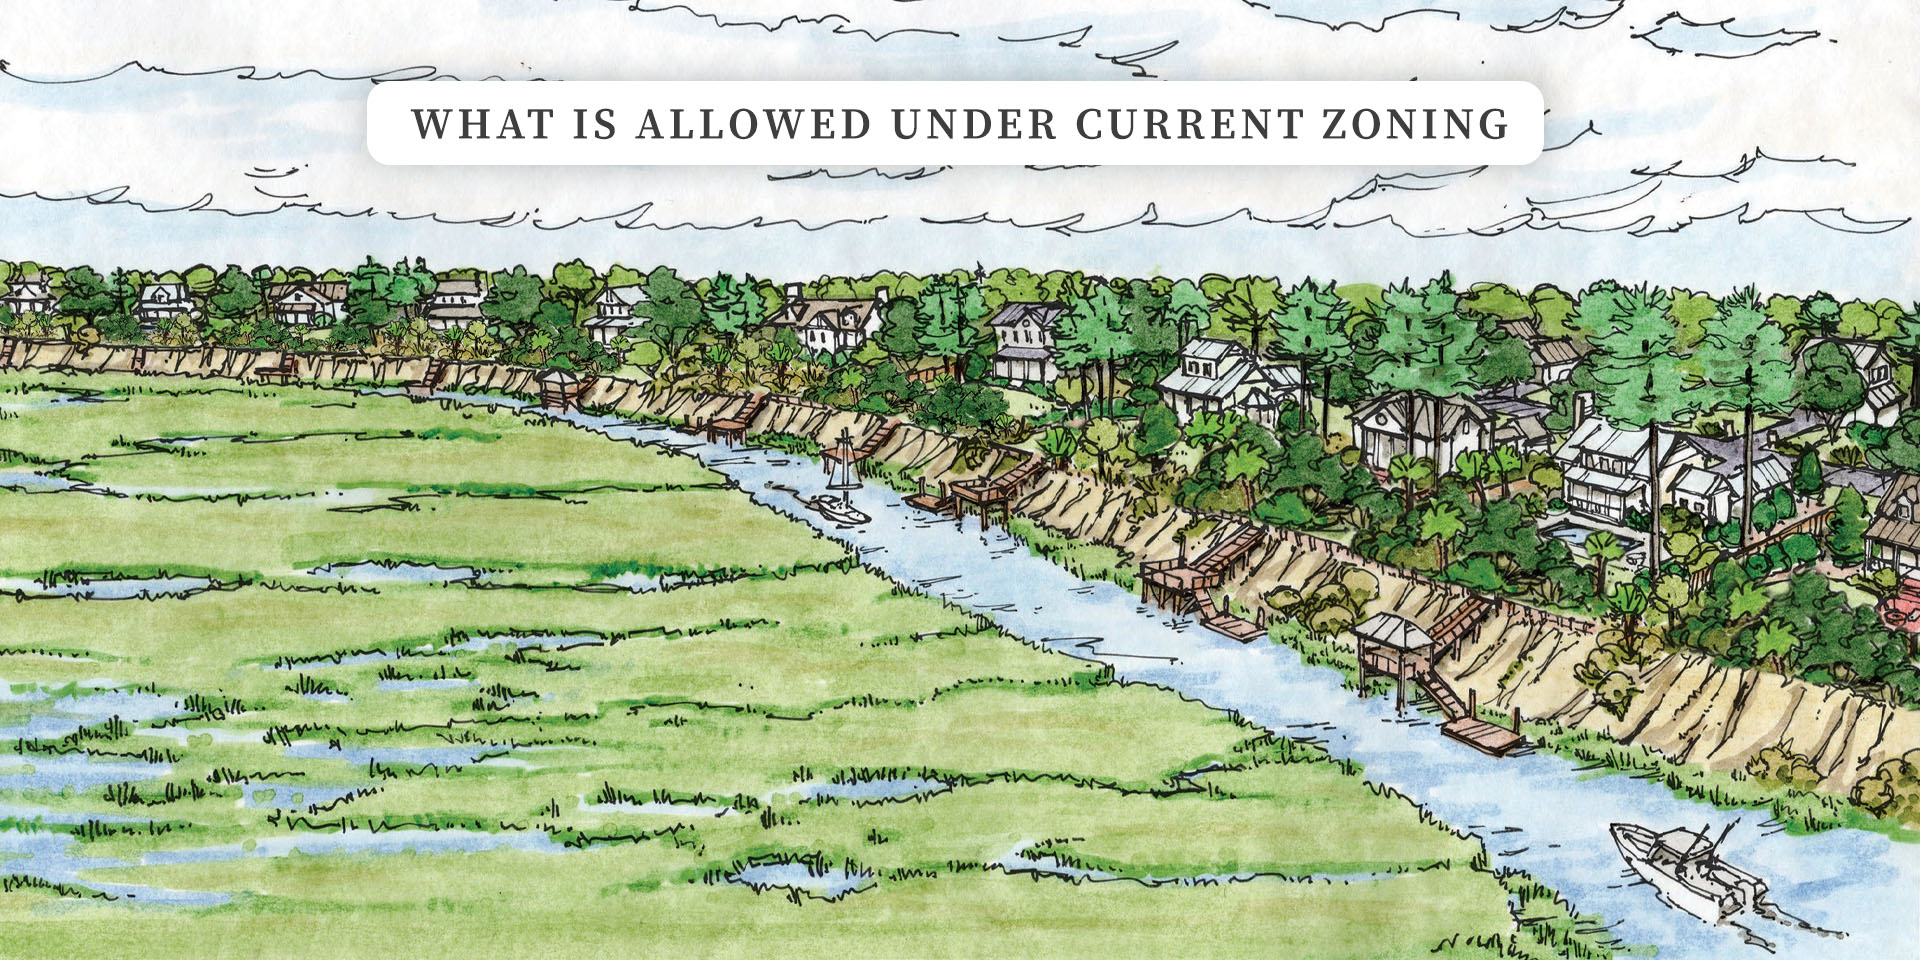 Looking to Eddings Creek: What Is Allowed Under Current Zoning